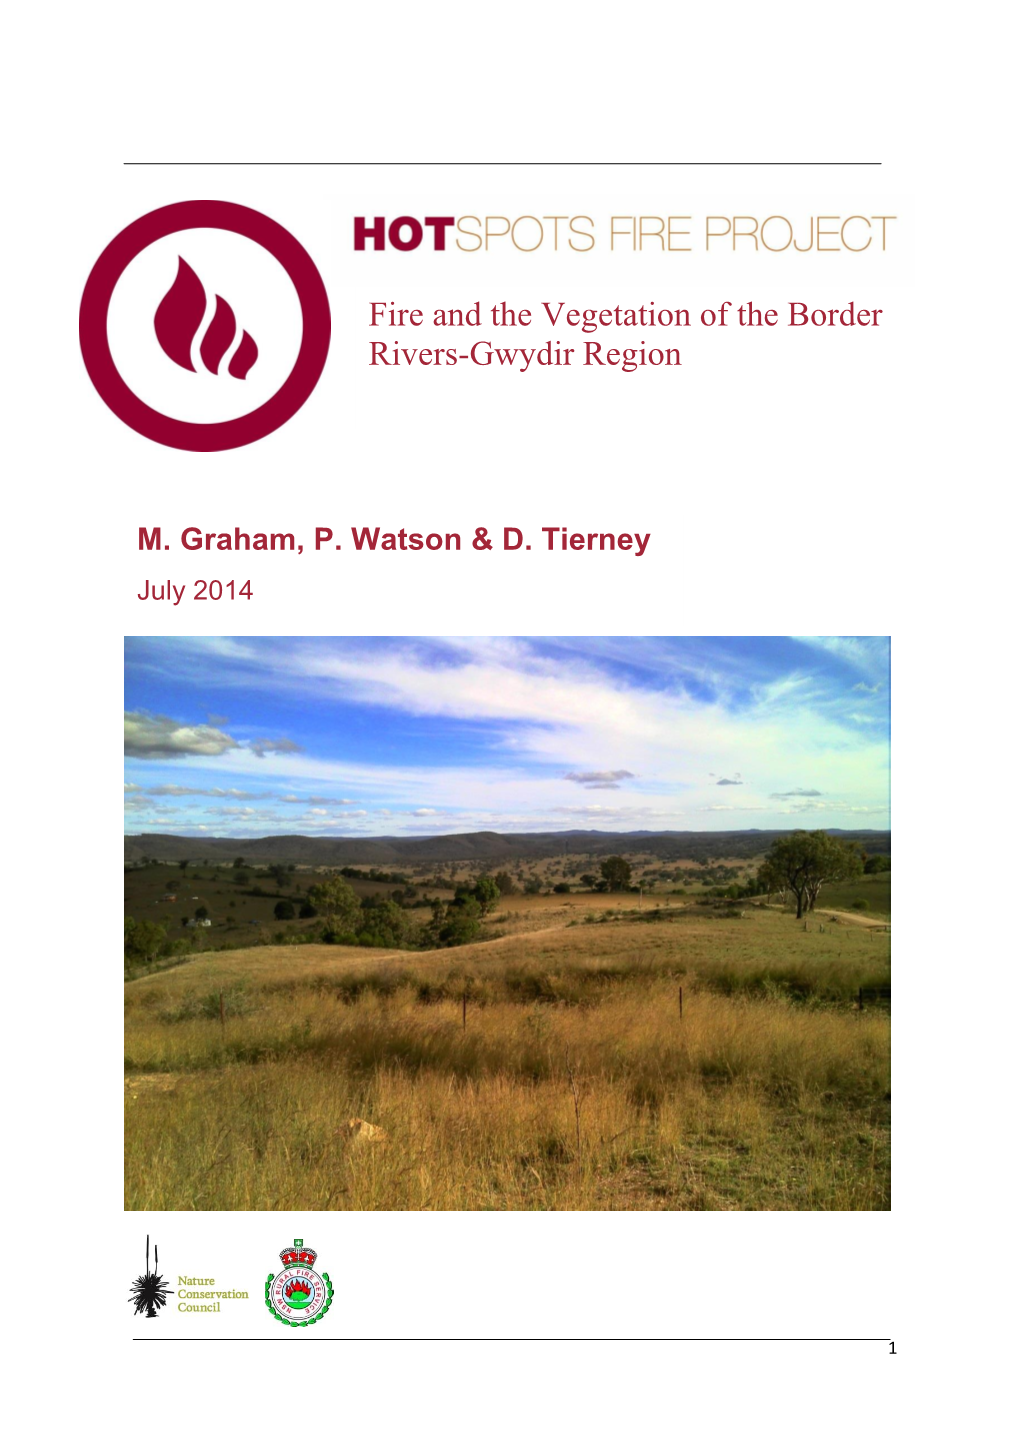 Fire and the Vegetation of the Border Rivers-Gwydir Region